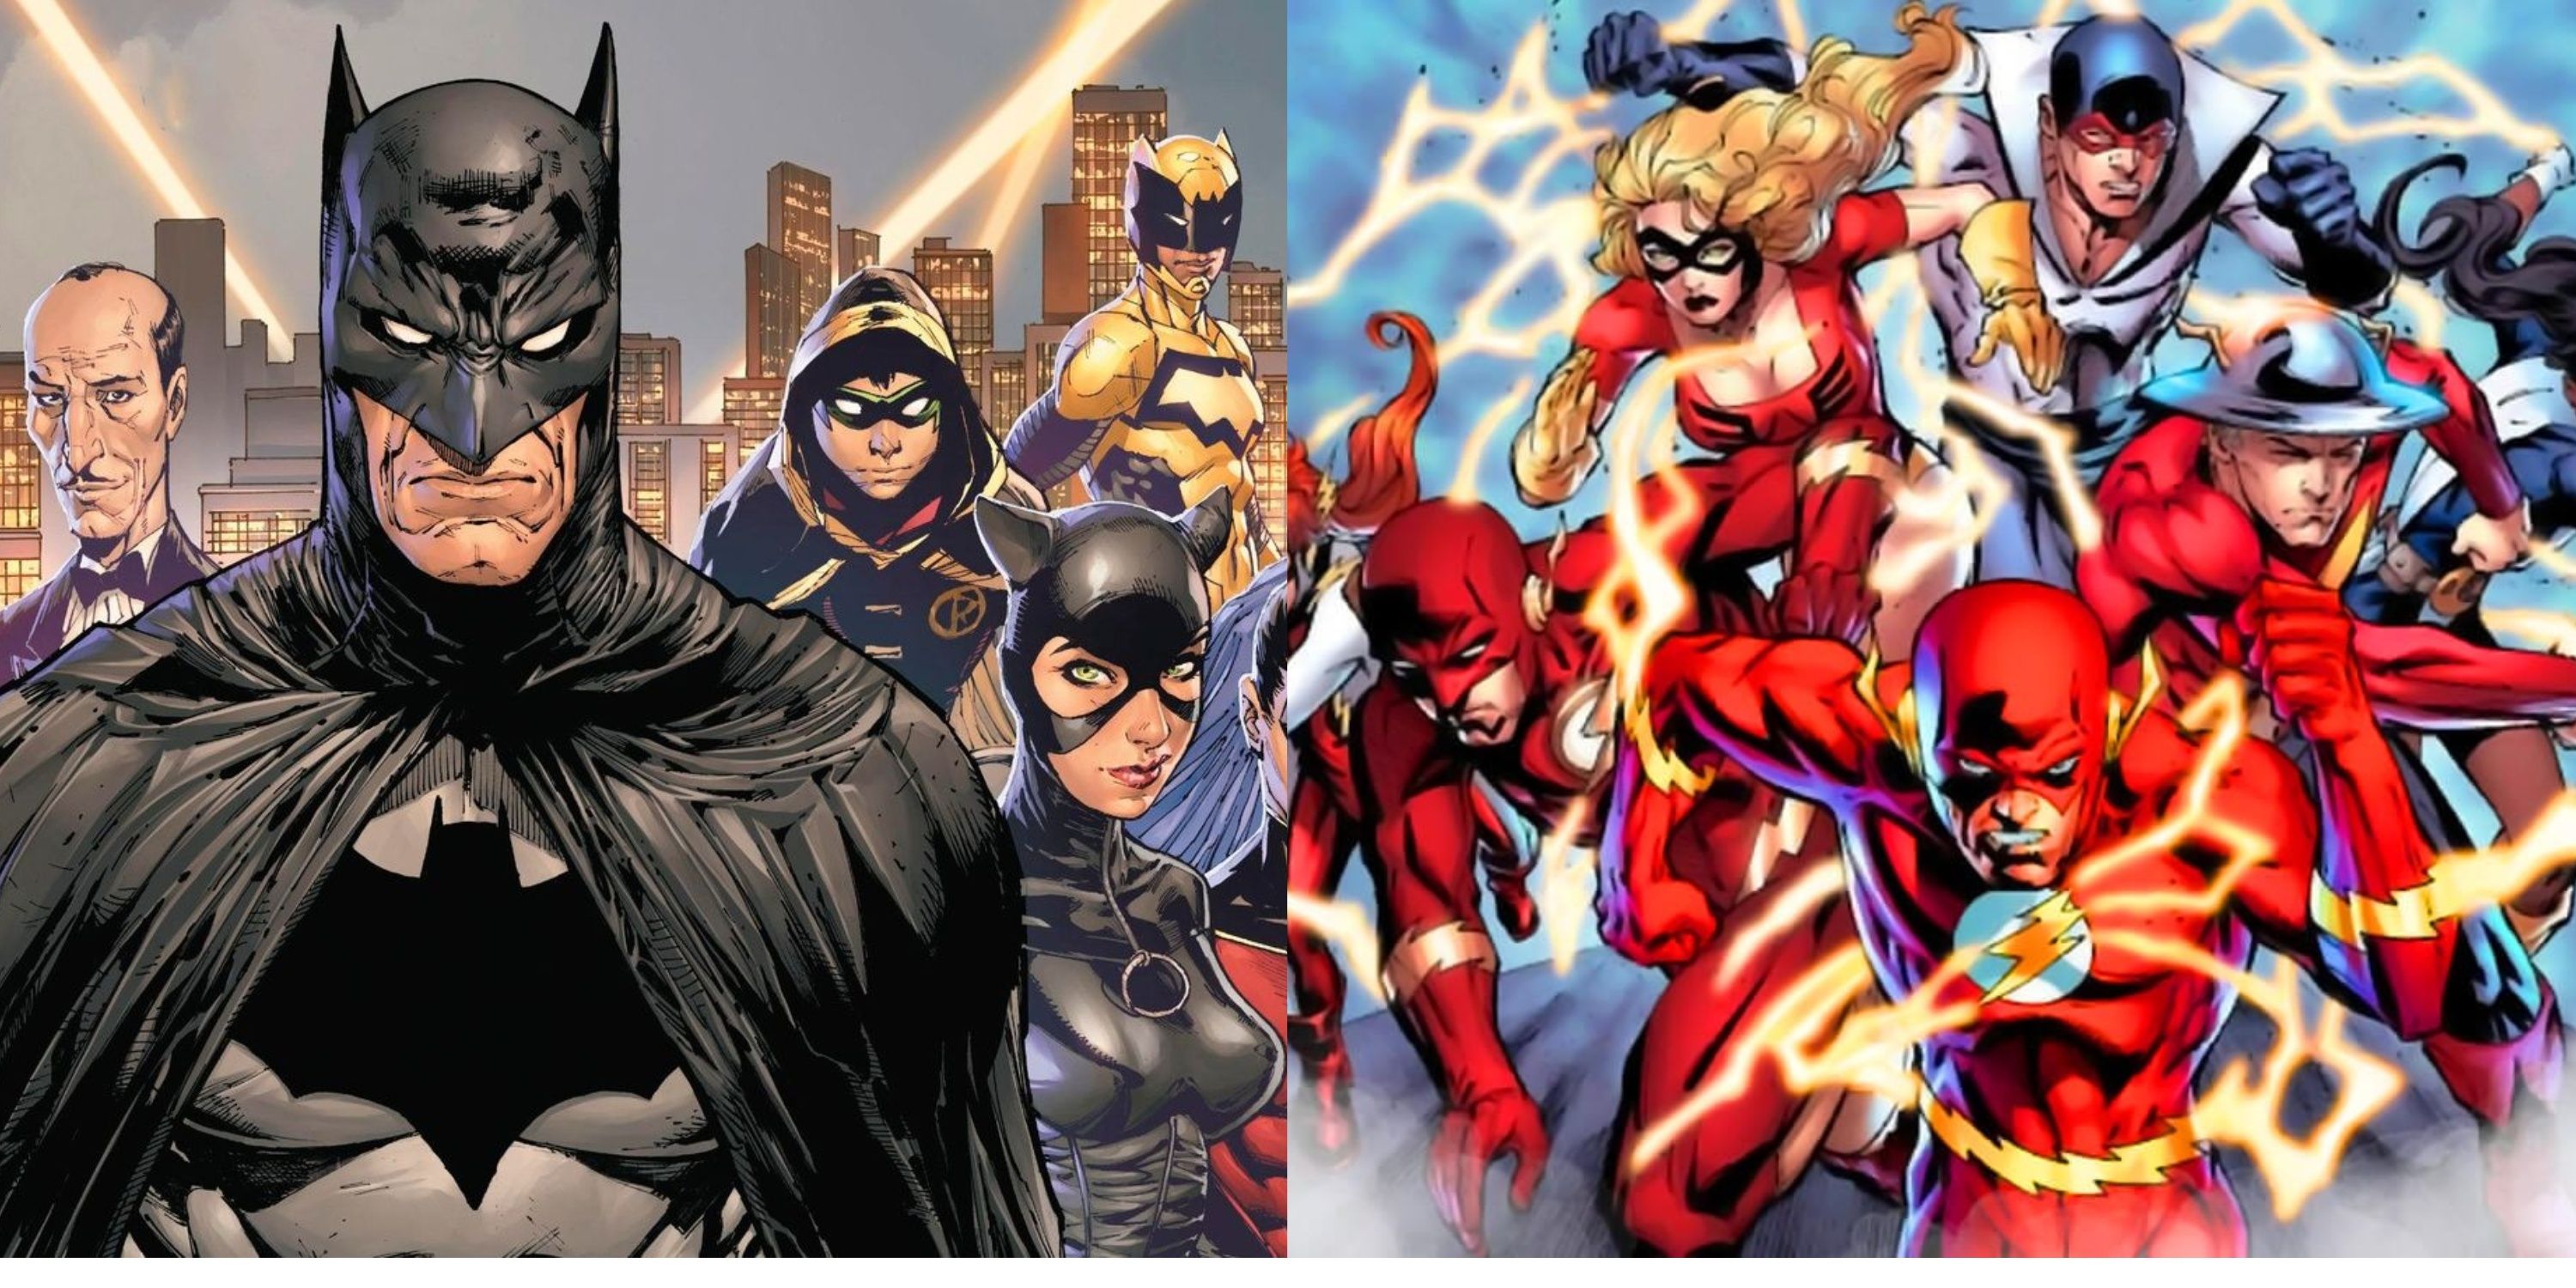 A split image of The Bat-Family and the Flash Family in DC Comics